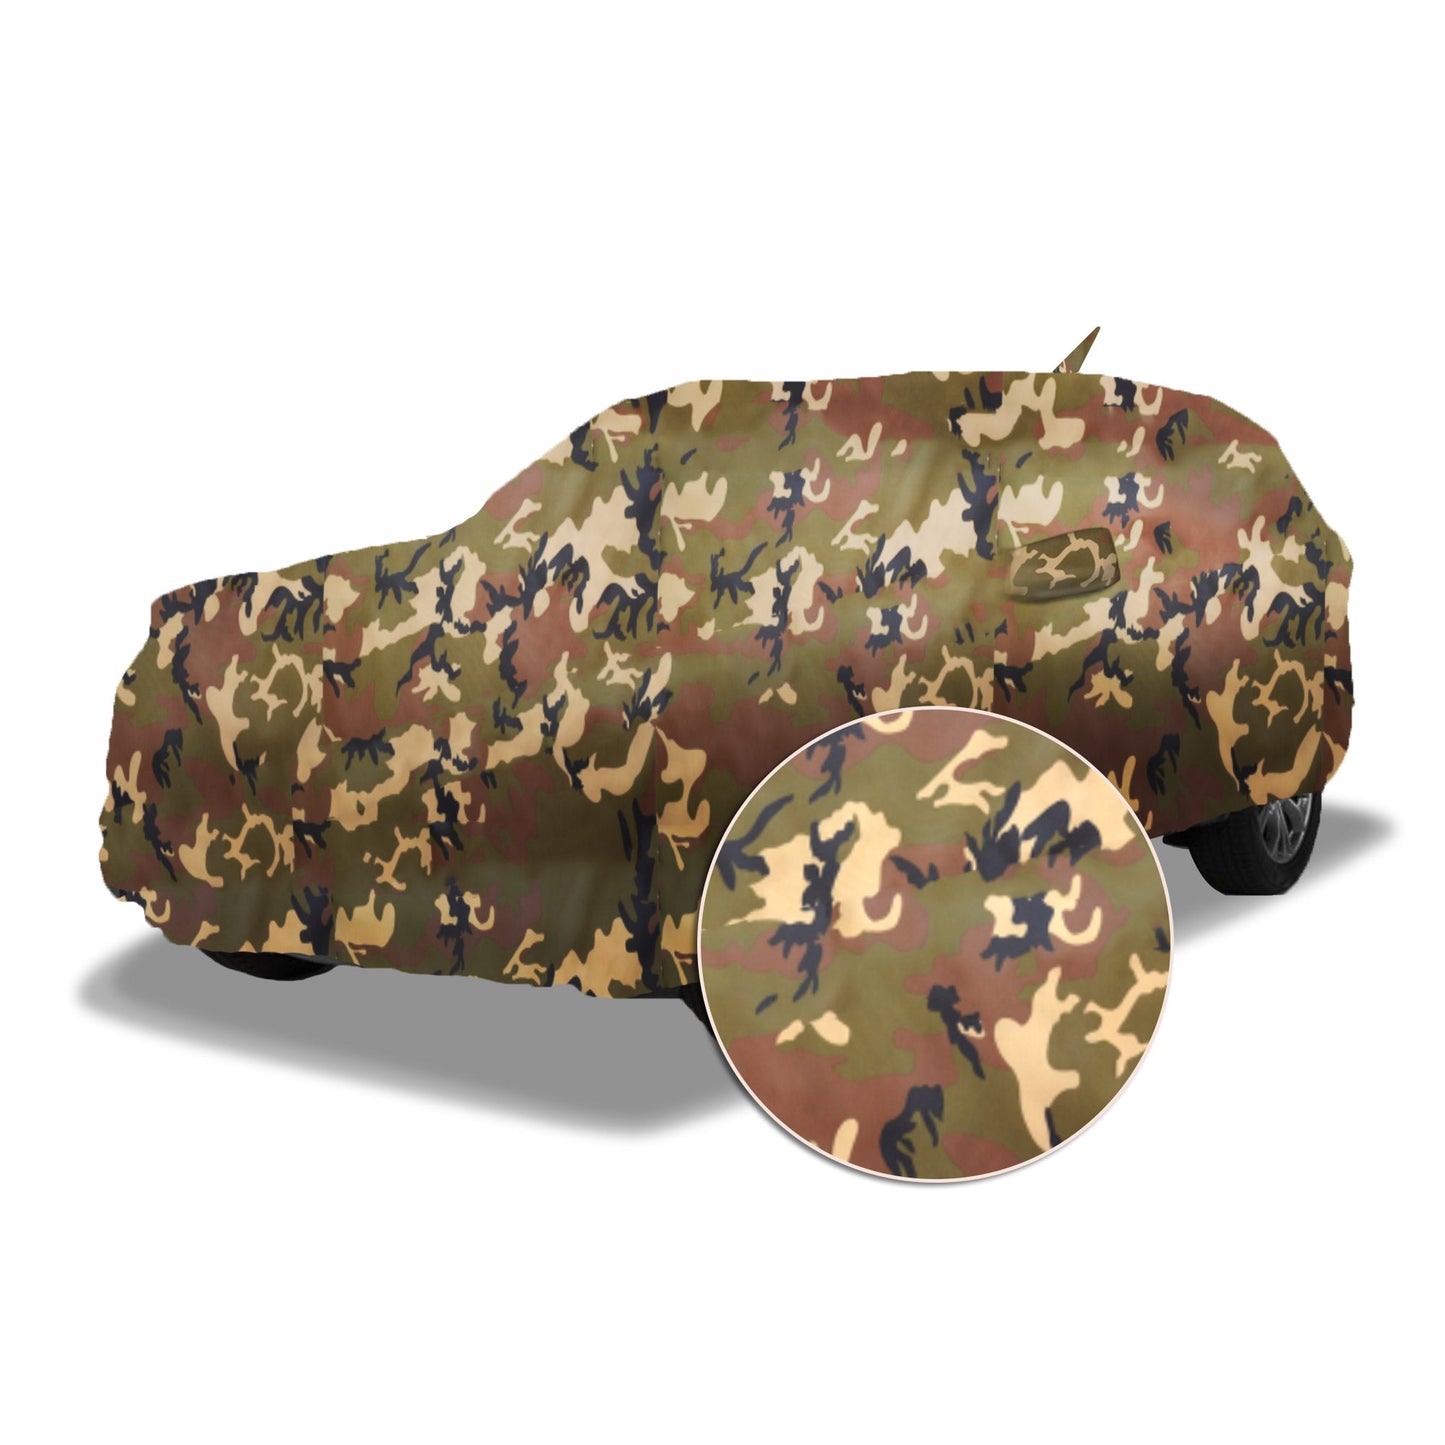 Ascot Volkswagen Polo GT Car Body Cover Extra Strong & Dust Proof Jungle Military Car Cover with UV Proof & Water-Resistant Coating